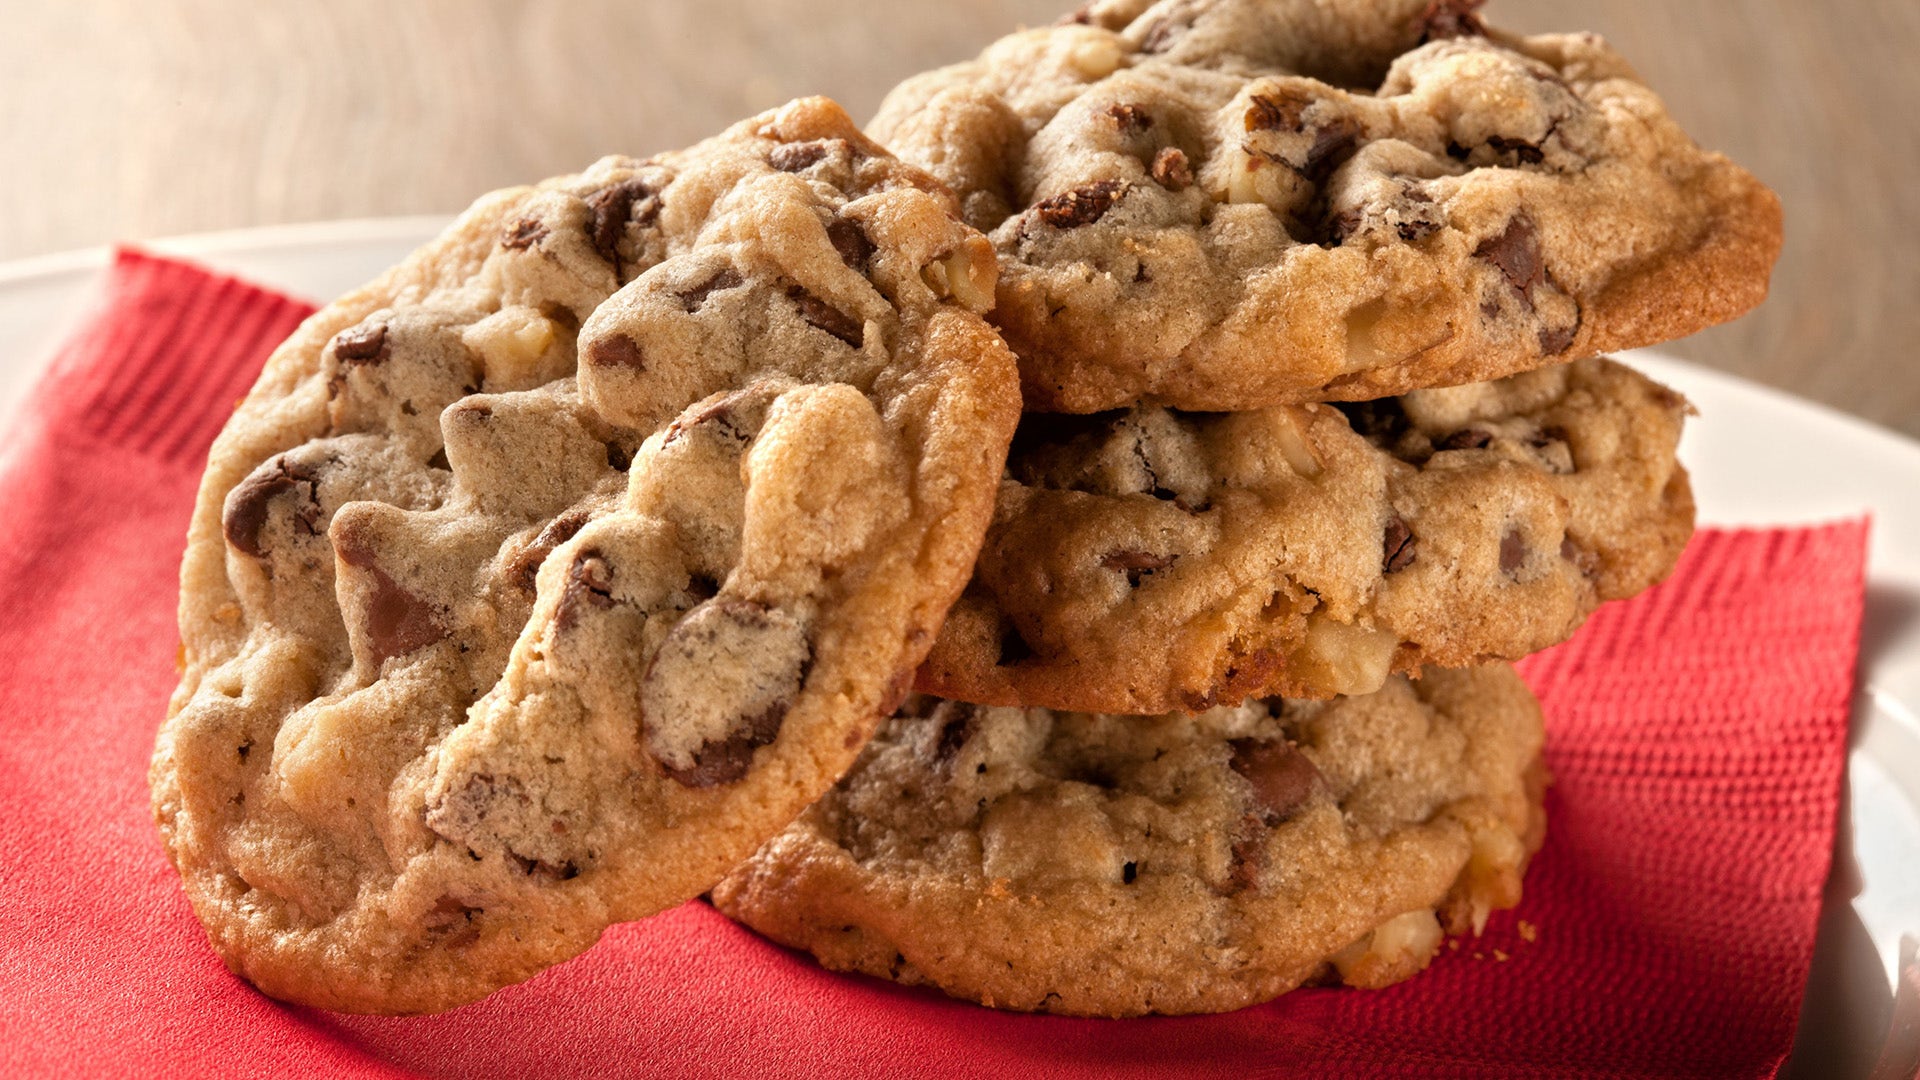 Image of Mixed Chocolate Chip Cookies